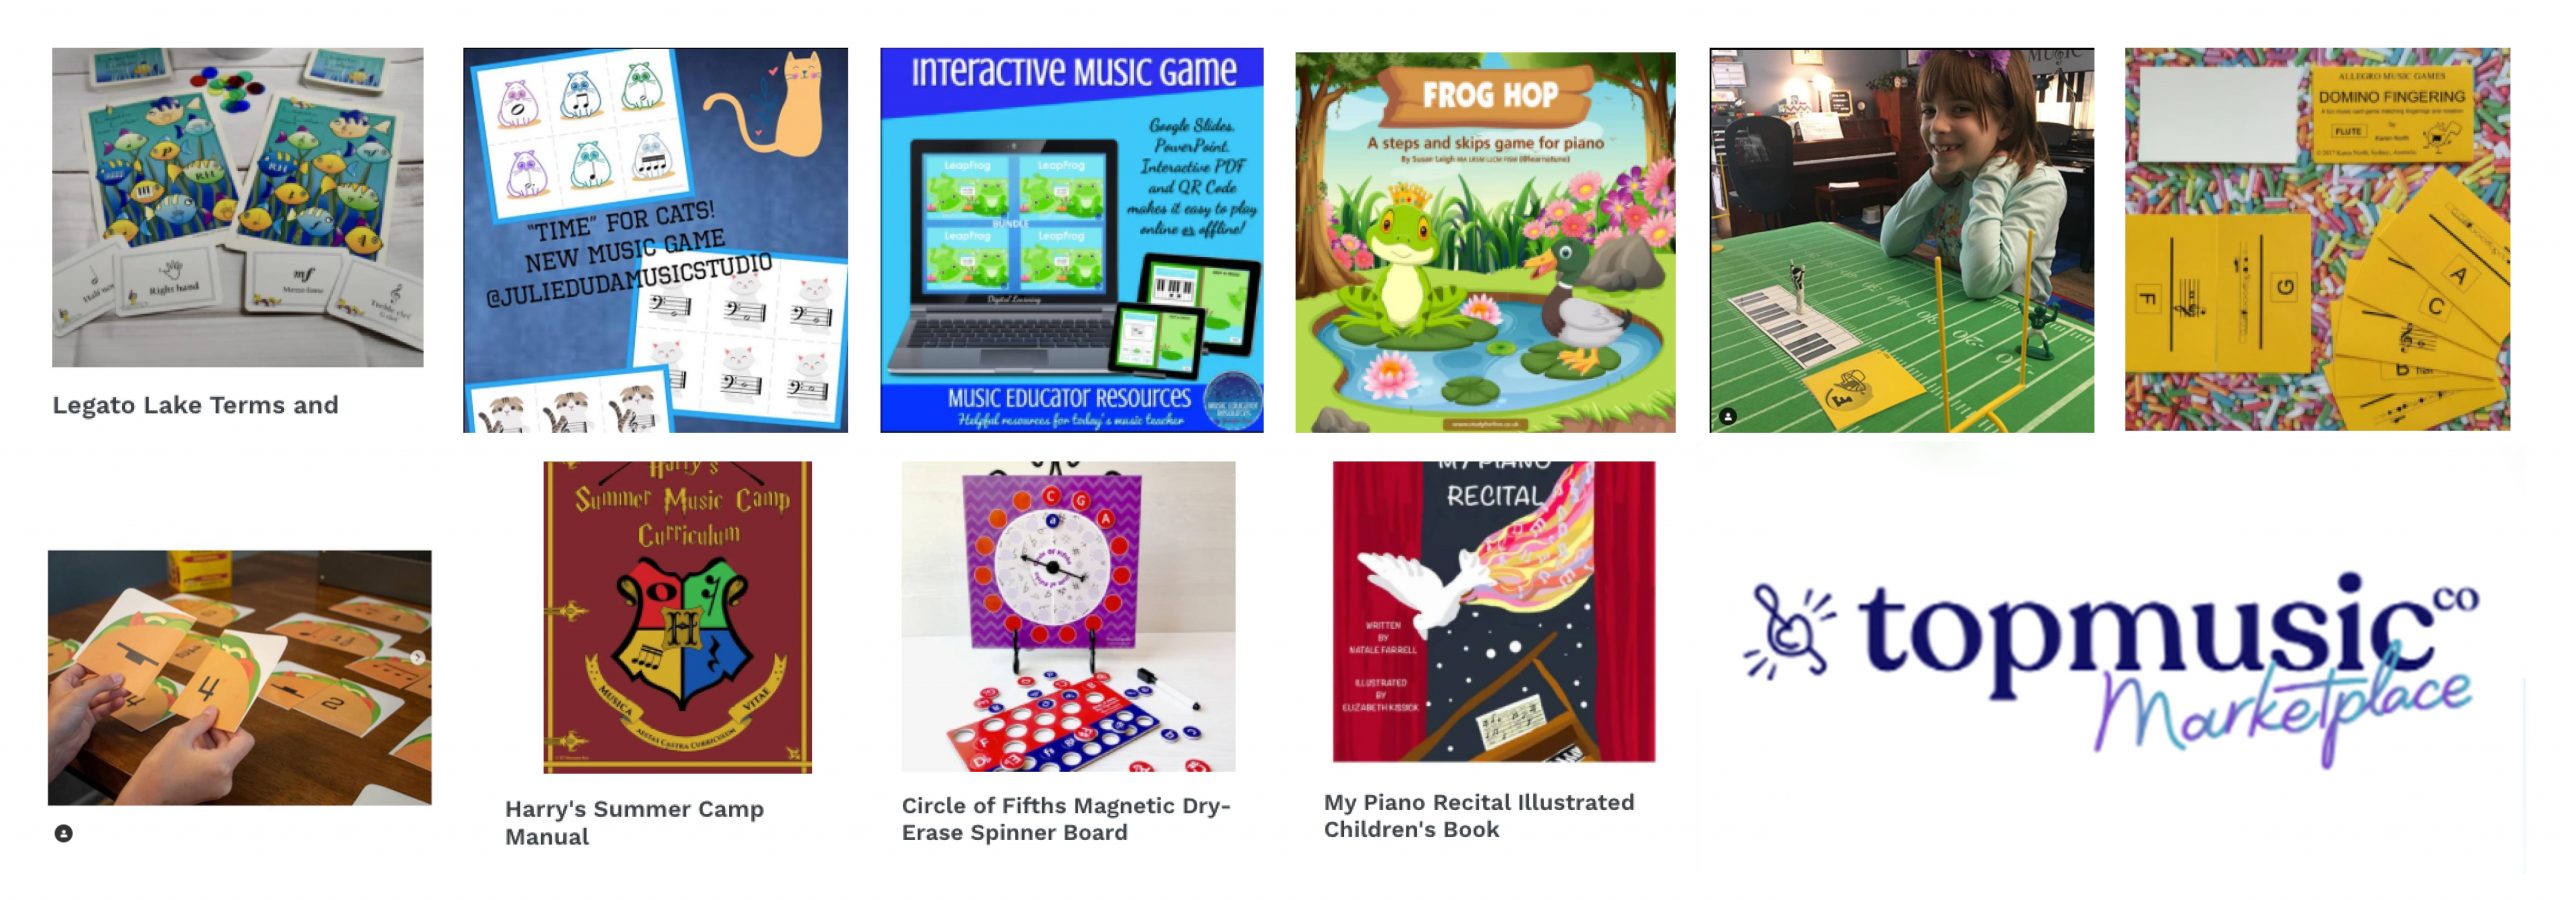 music theory games at topmusic marketplace